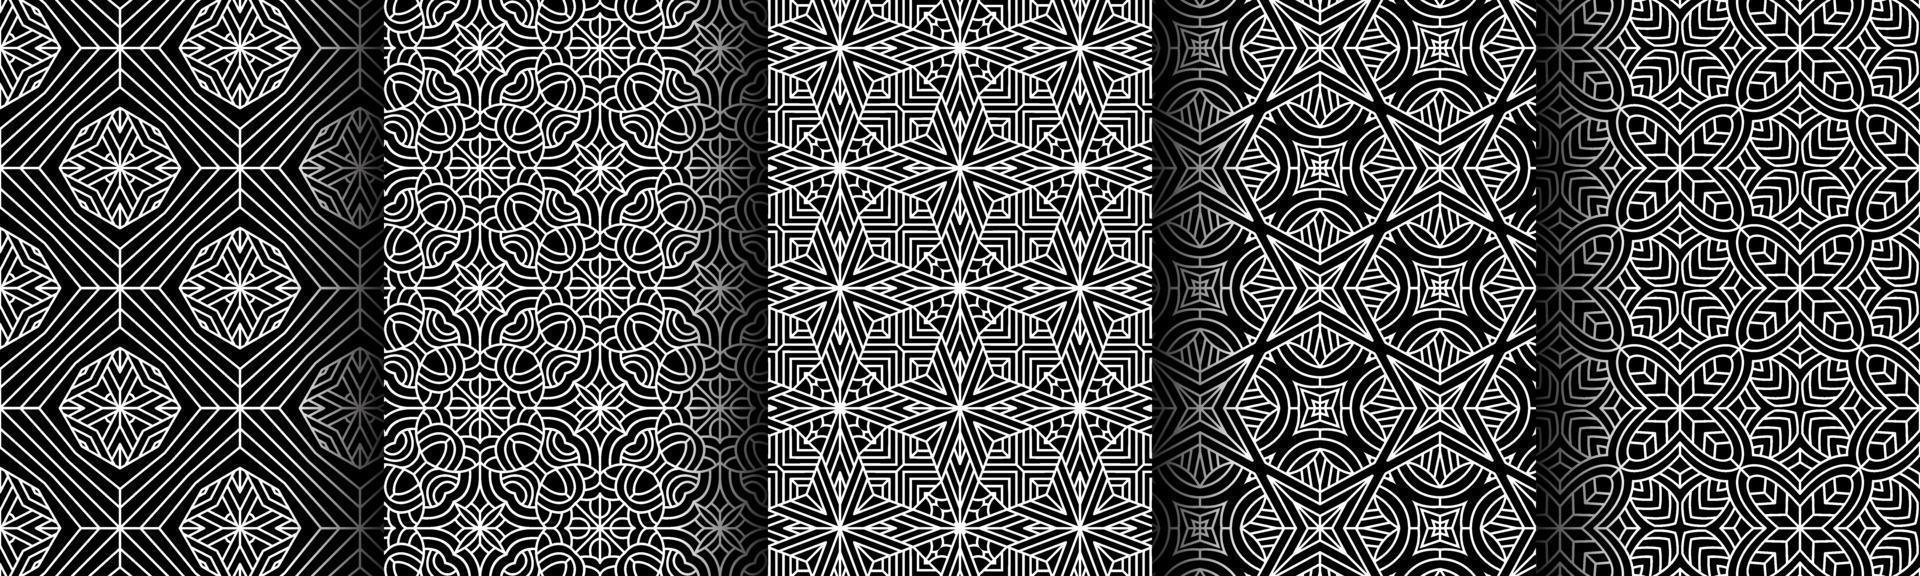 modern black and white geometric pattern collection bundle vector